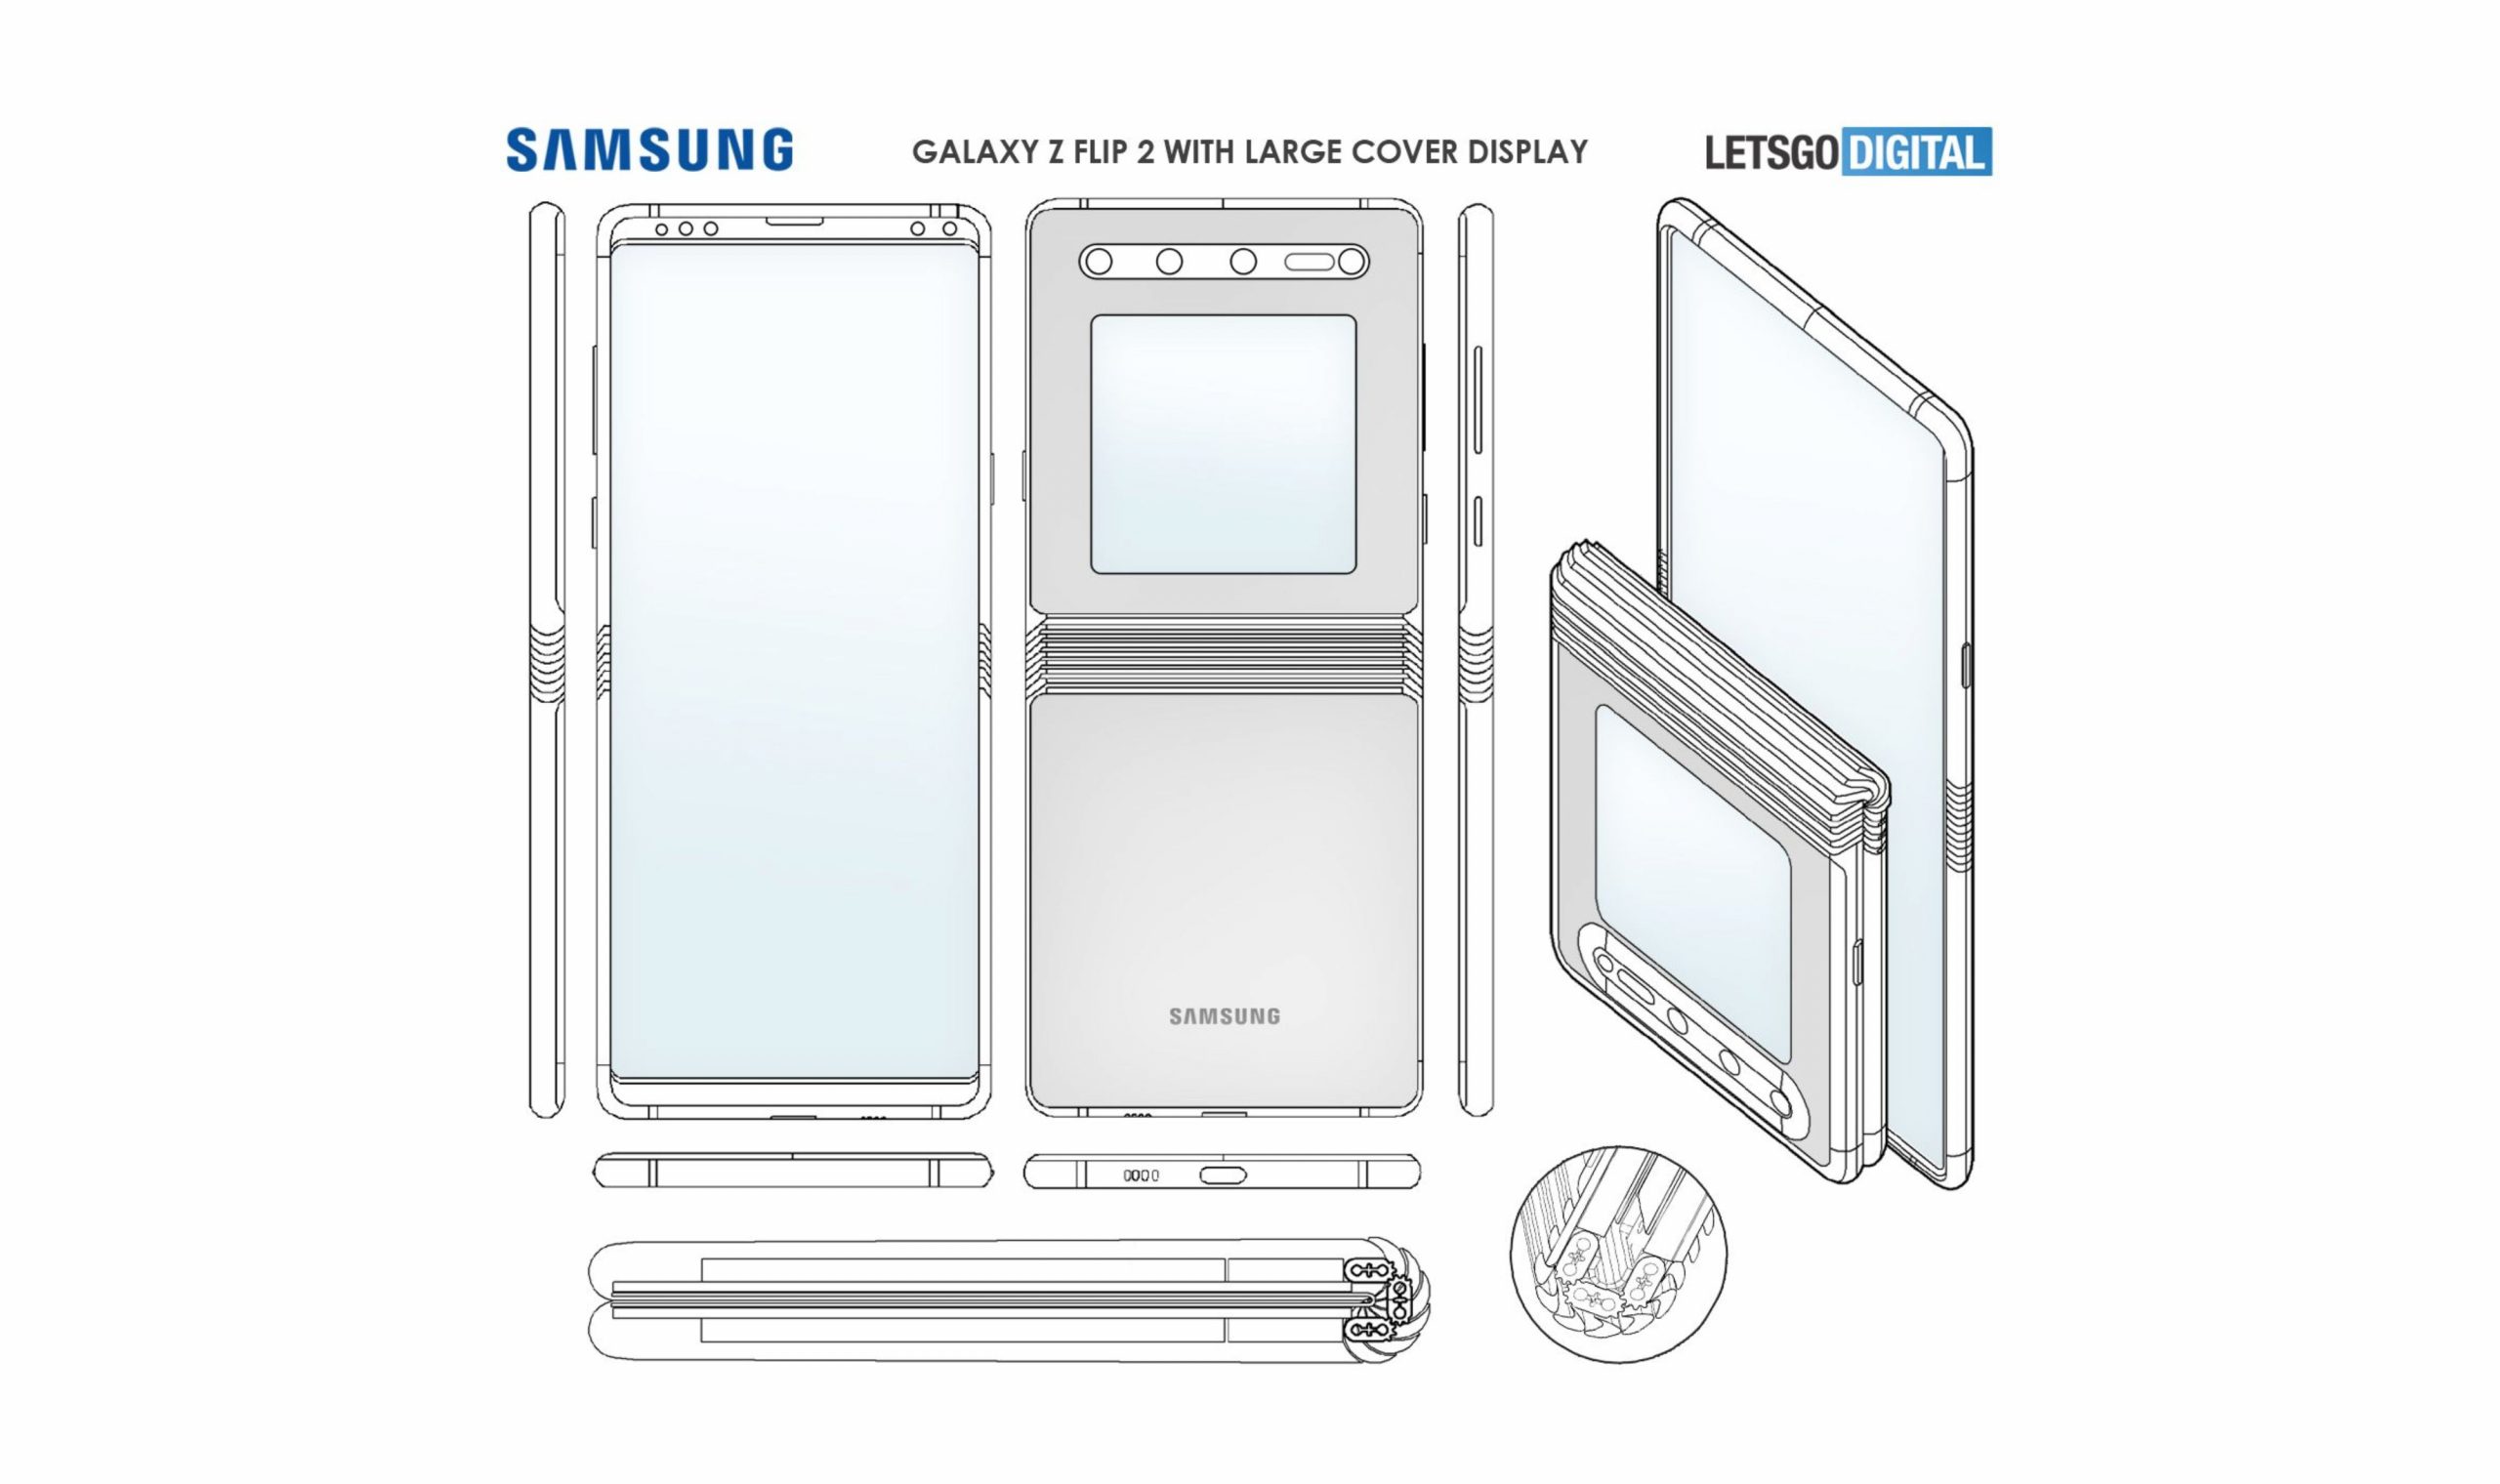 Samsung patents a clamshell foldable phone design with zero-gap hinge & larger cover display